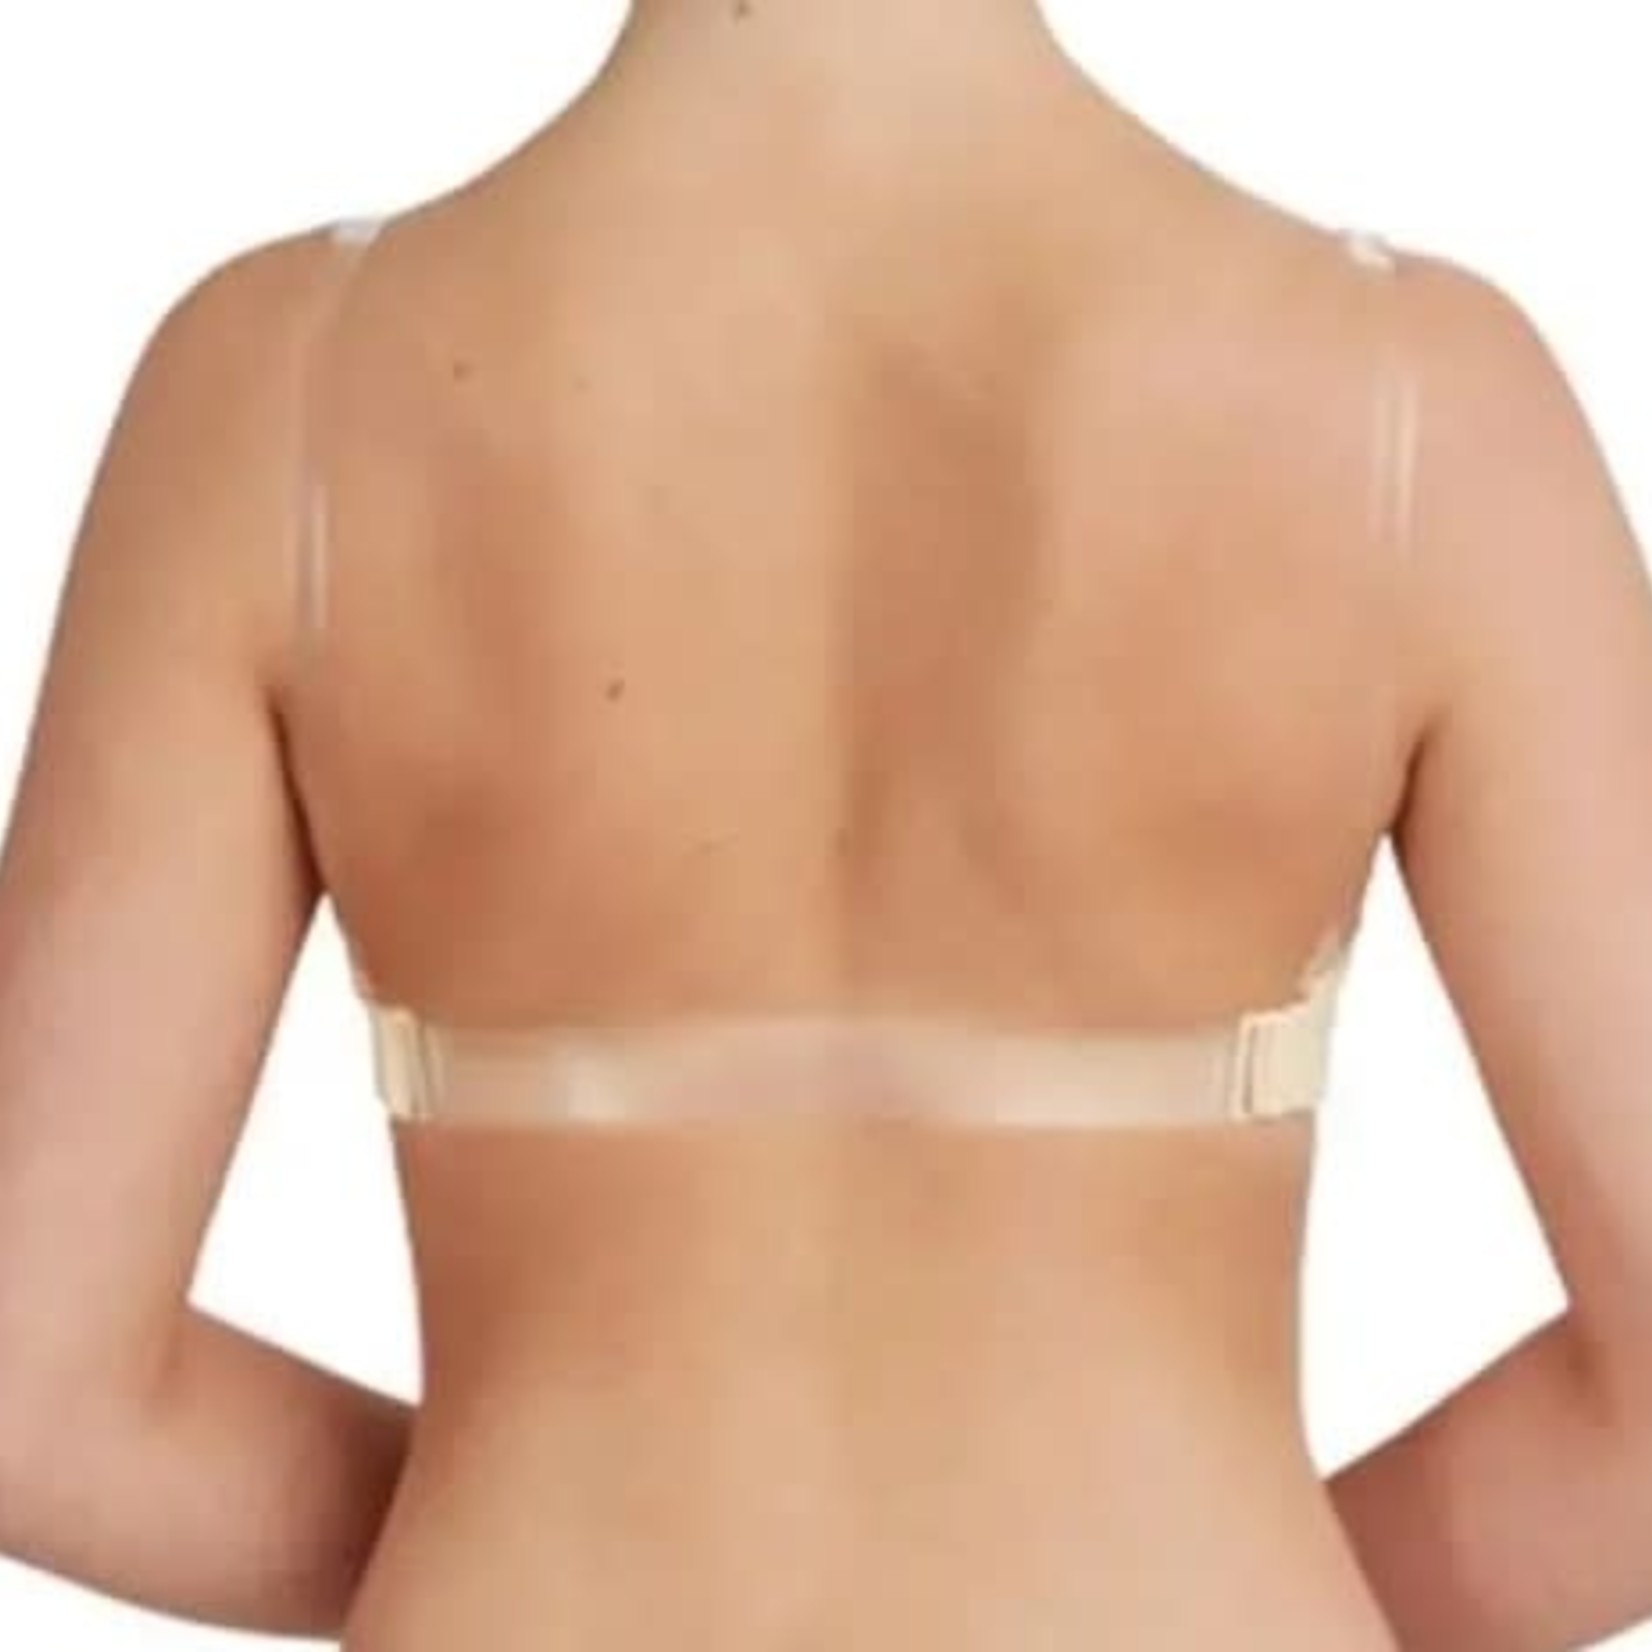 Body Wrappers 0275 Child Clear Straps Bra